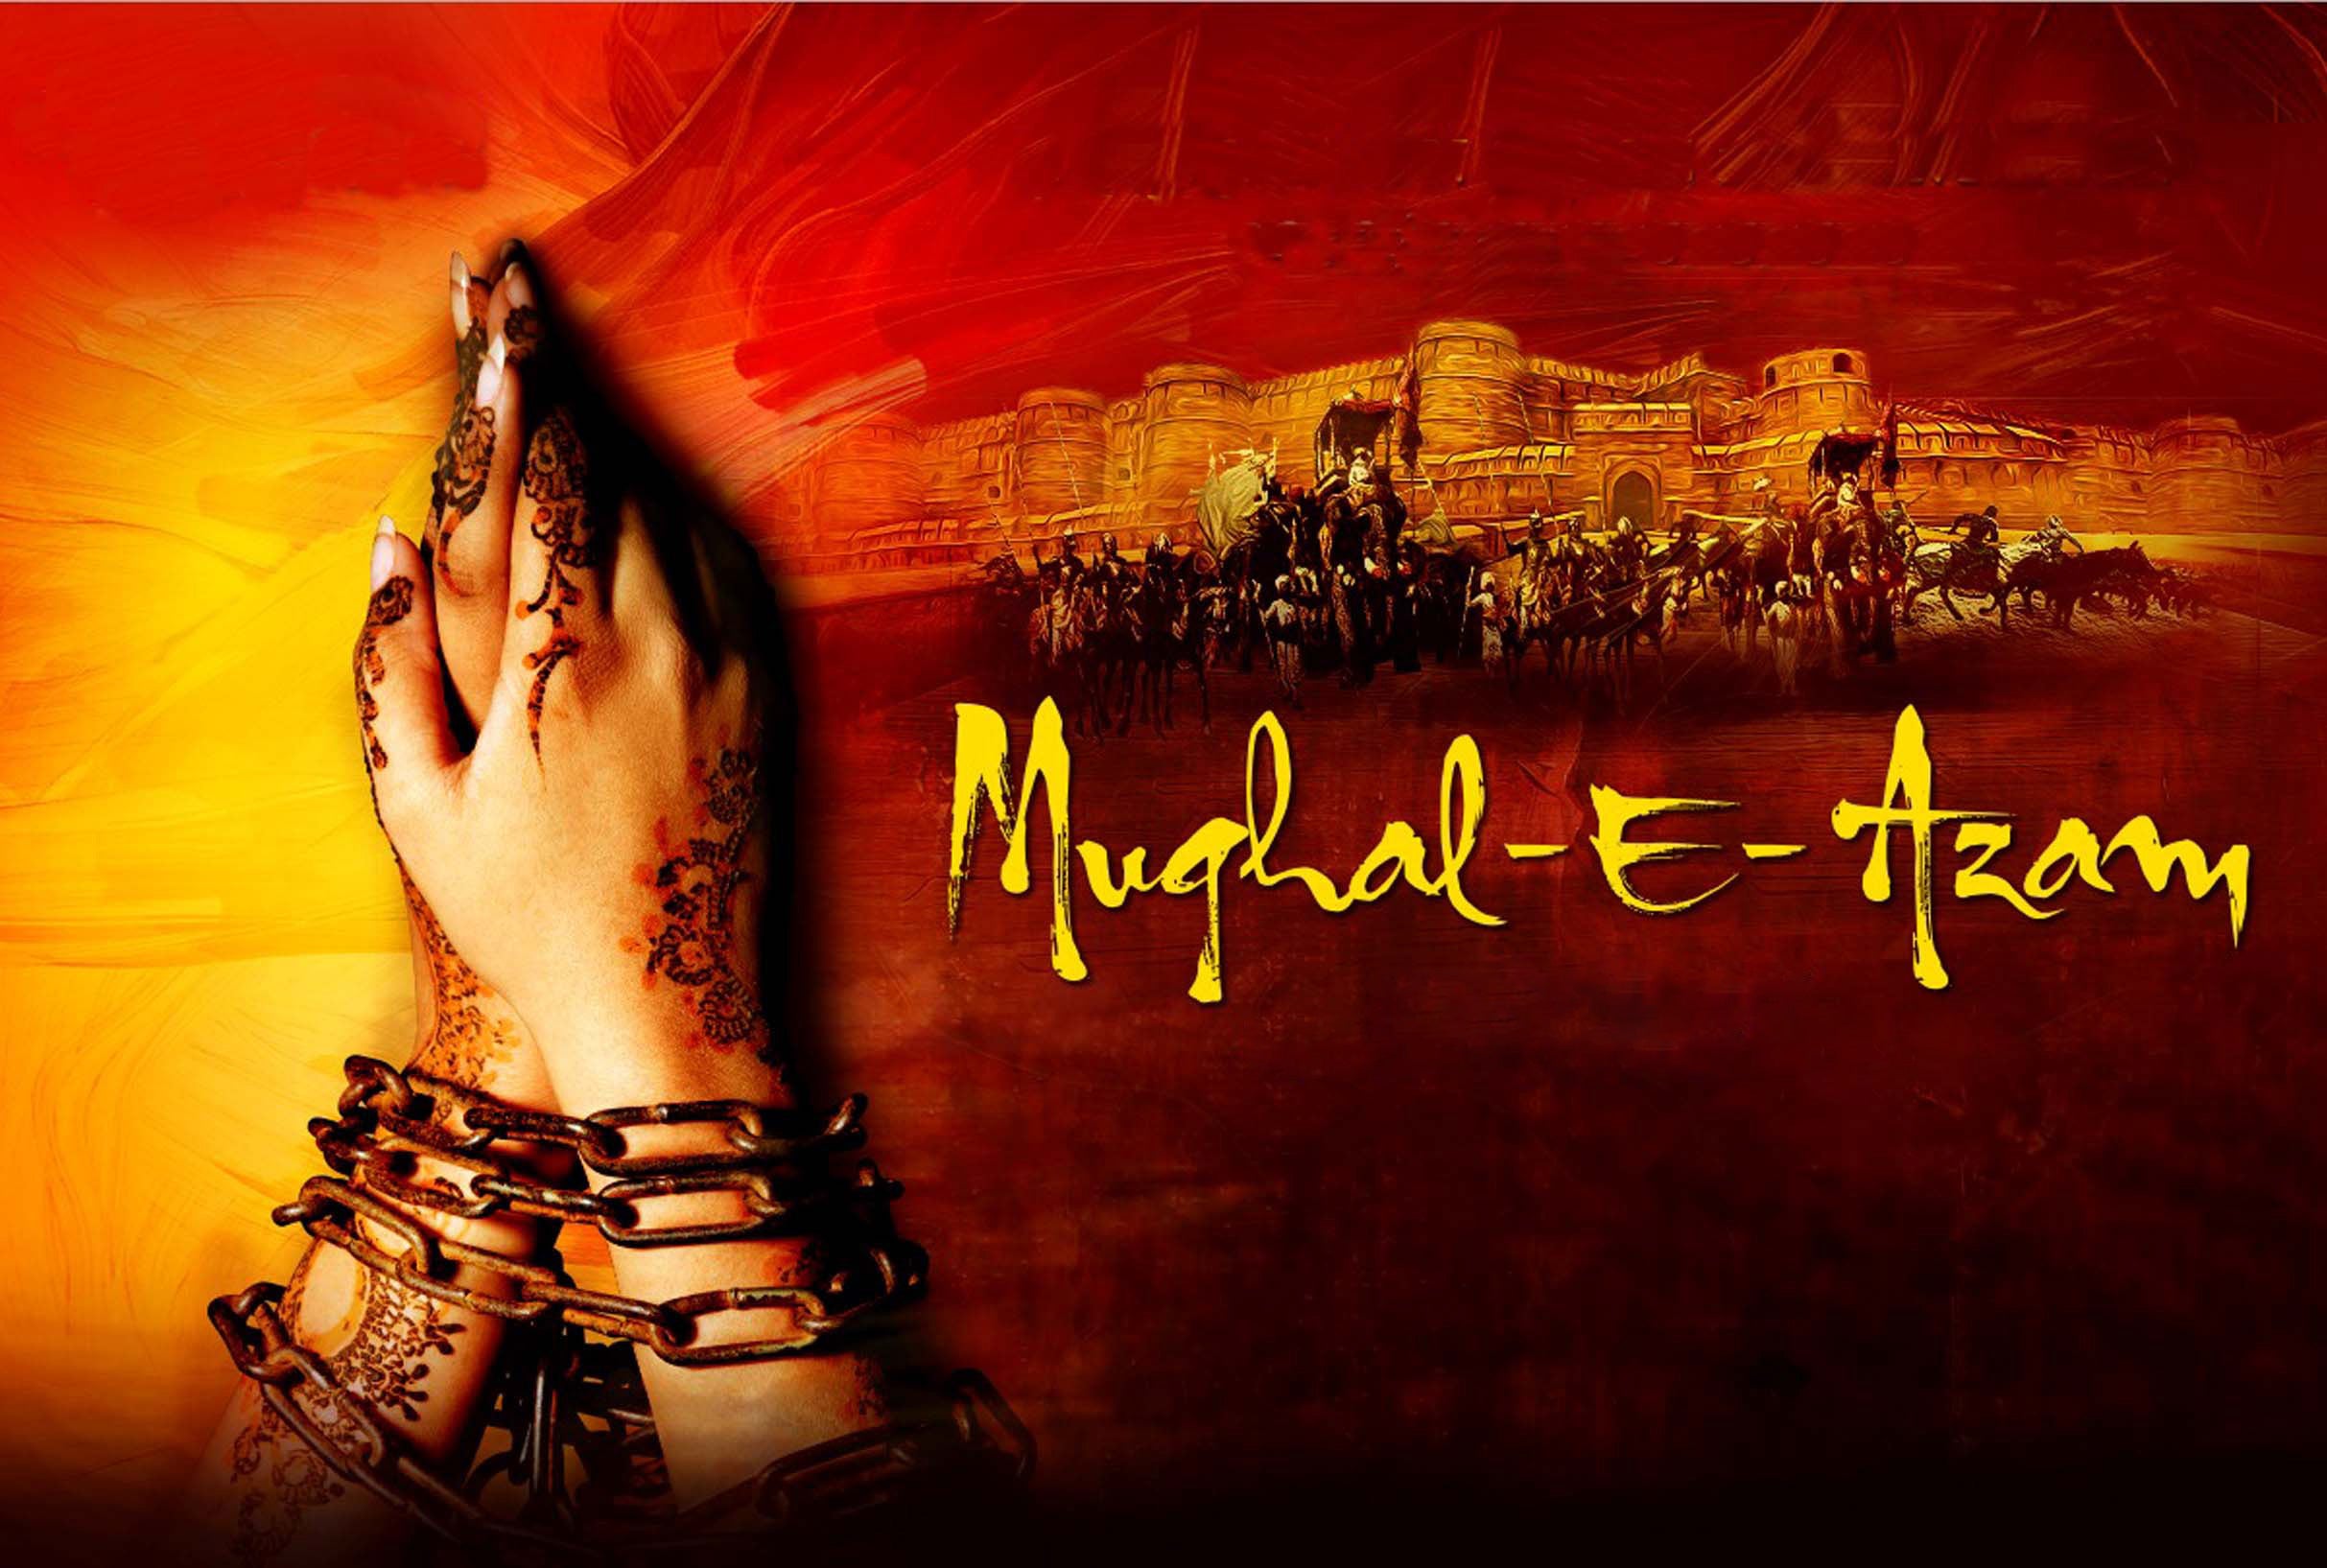 Mughal e-Azam: The Musical presale code for show tickets in Newark, NJ (New Jersey Performing Arts Center)